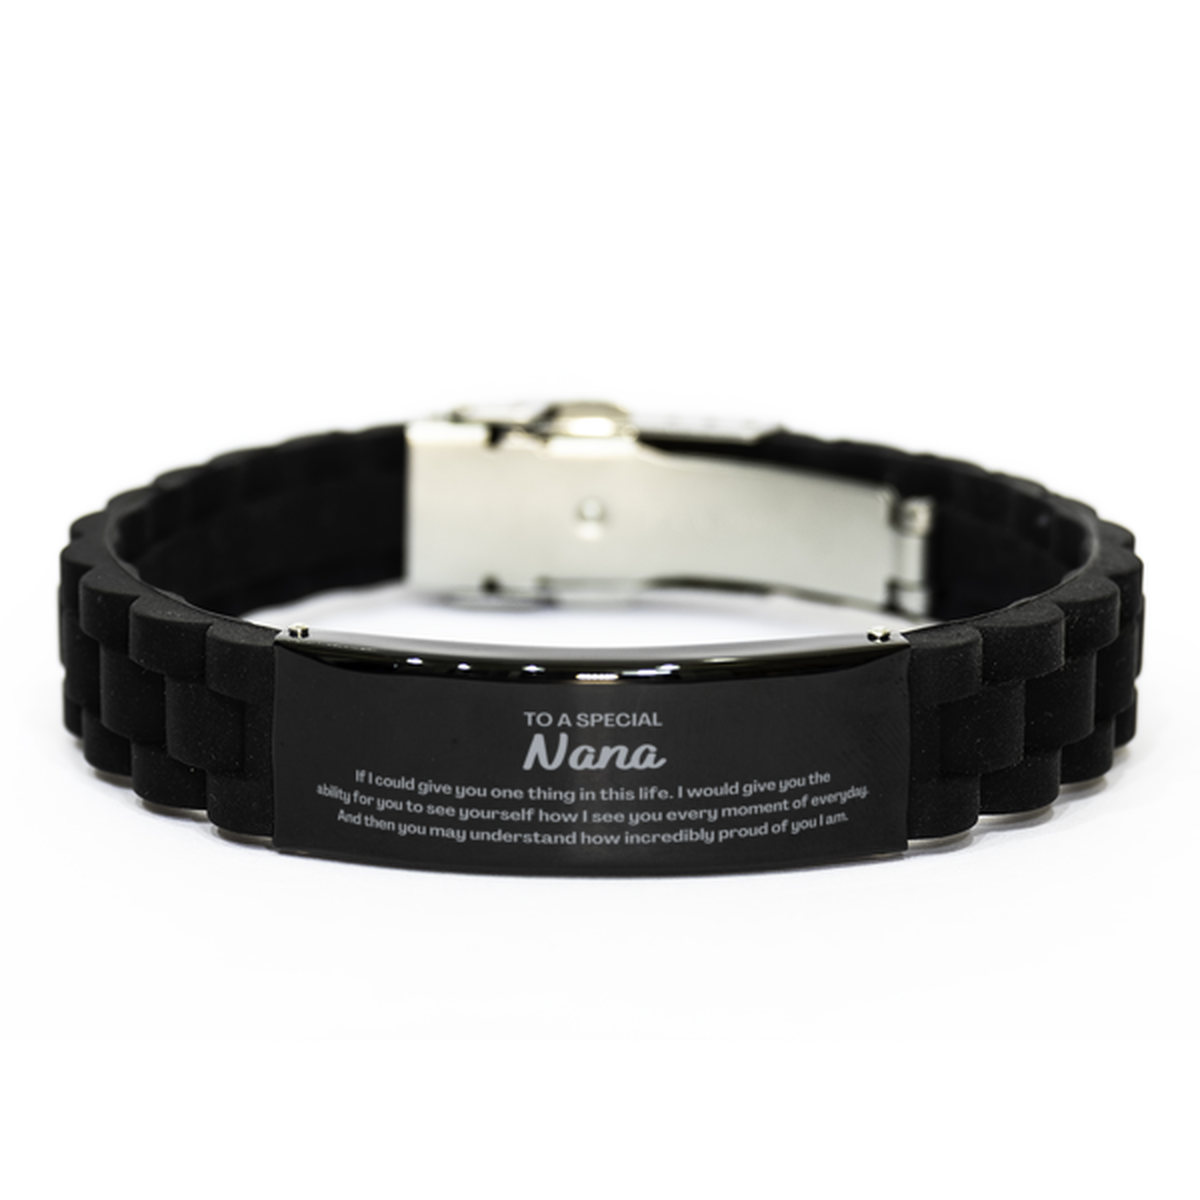 To My Nana Black Glidelock Clasp Bracelet, Gifts For Nana Engraved, Inspirational Gifts for Christmas Birthday, Epic Gifts for Nana To A Special Nana how incredibly proud of you I am